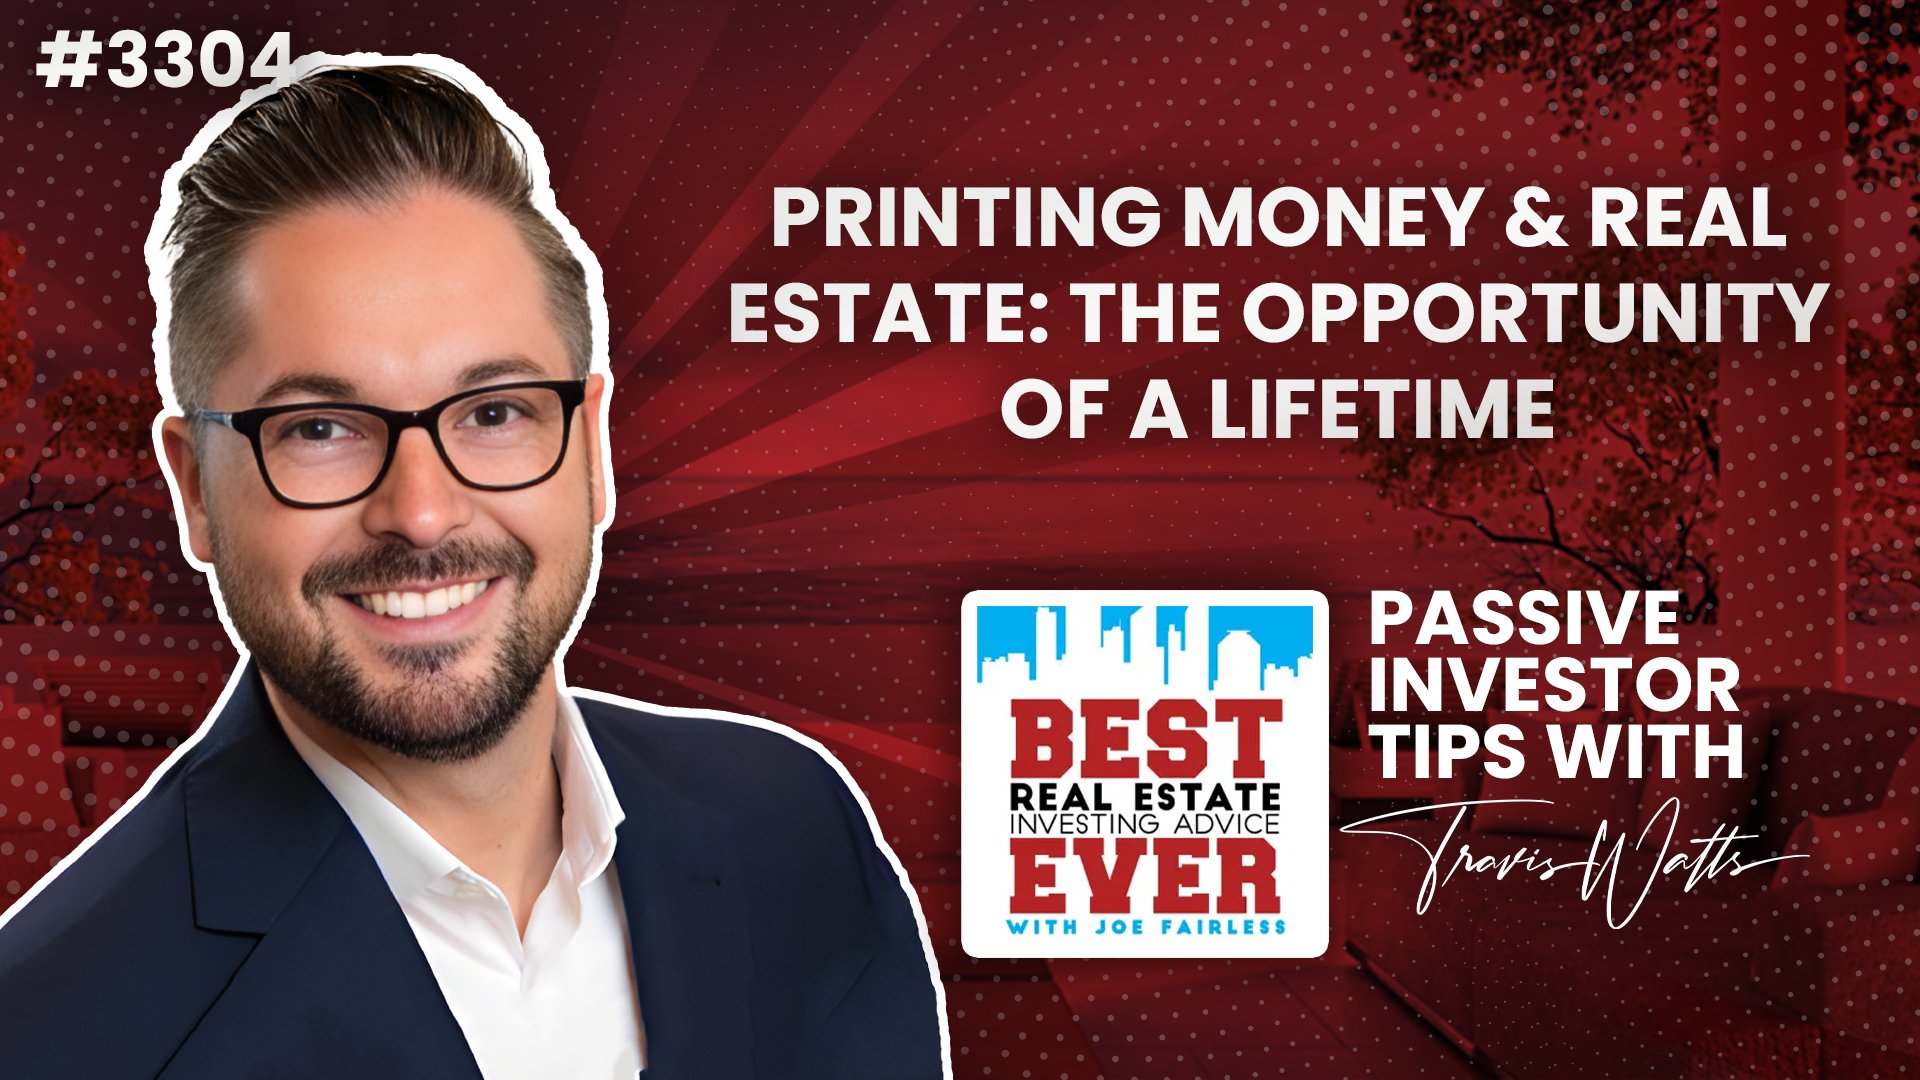 Printing Money & Real Estate: The Opportunity of a Lifetime